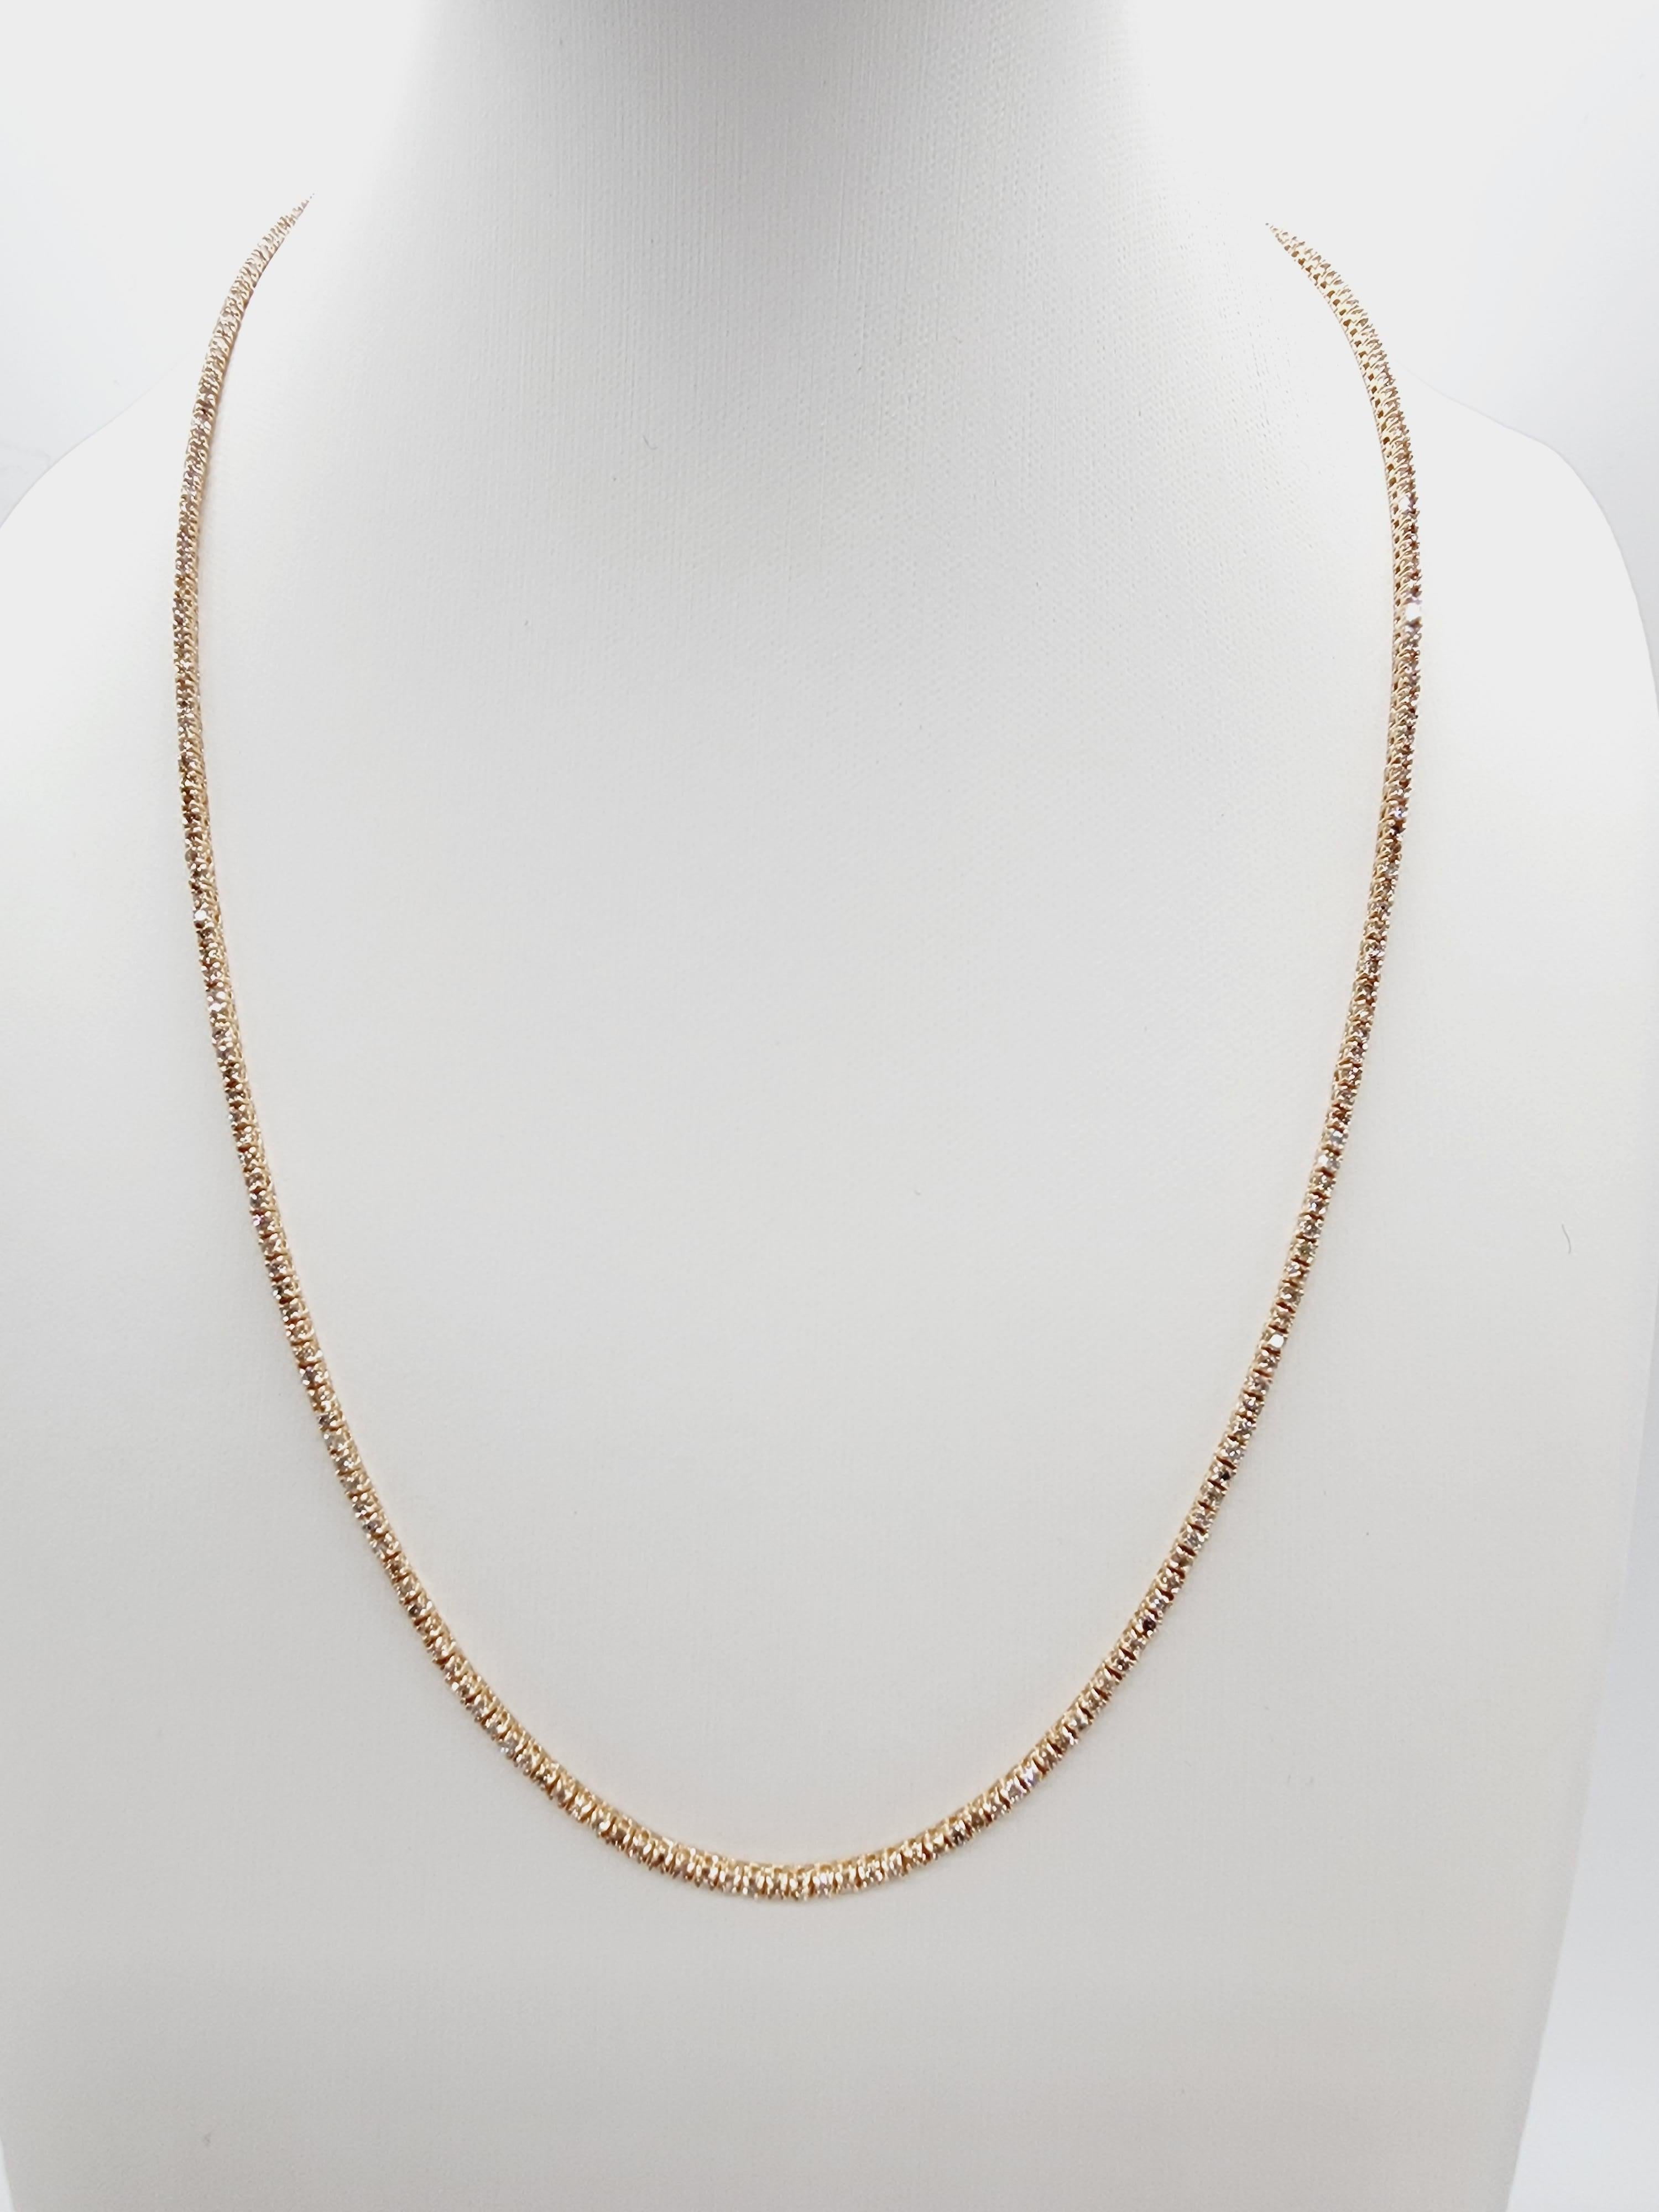 Brilliant and beautiful tennis necklace, natural round-brilliant cut white diamonds clean and Excellent shine. 14k rose gold classic four-prong style for maximum light brilliance. Elegance for every occasion.

18 inch length. 
Average i Color, SI